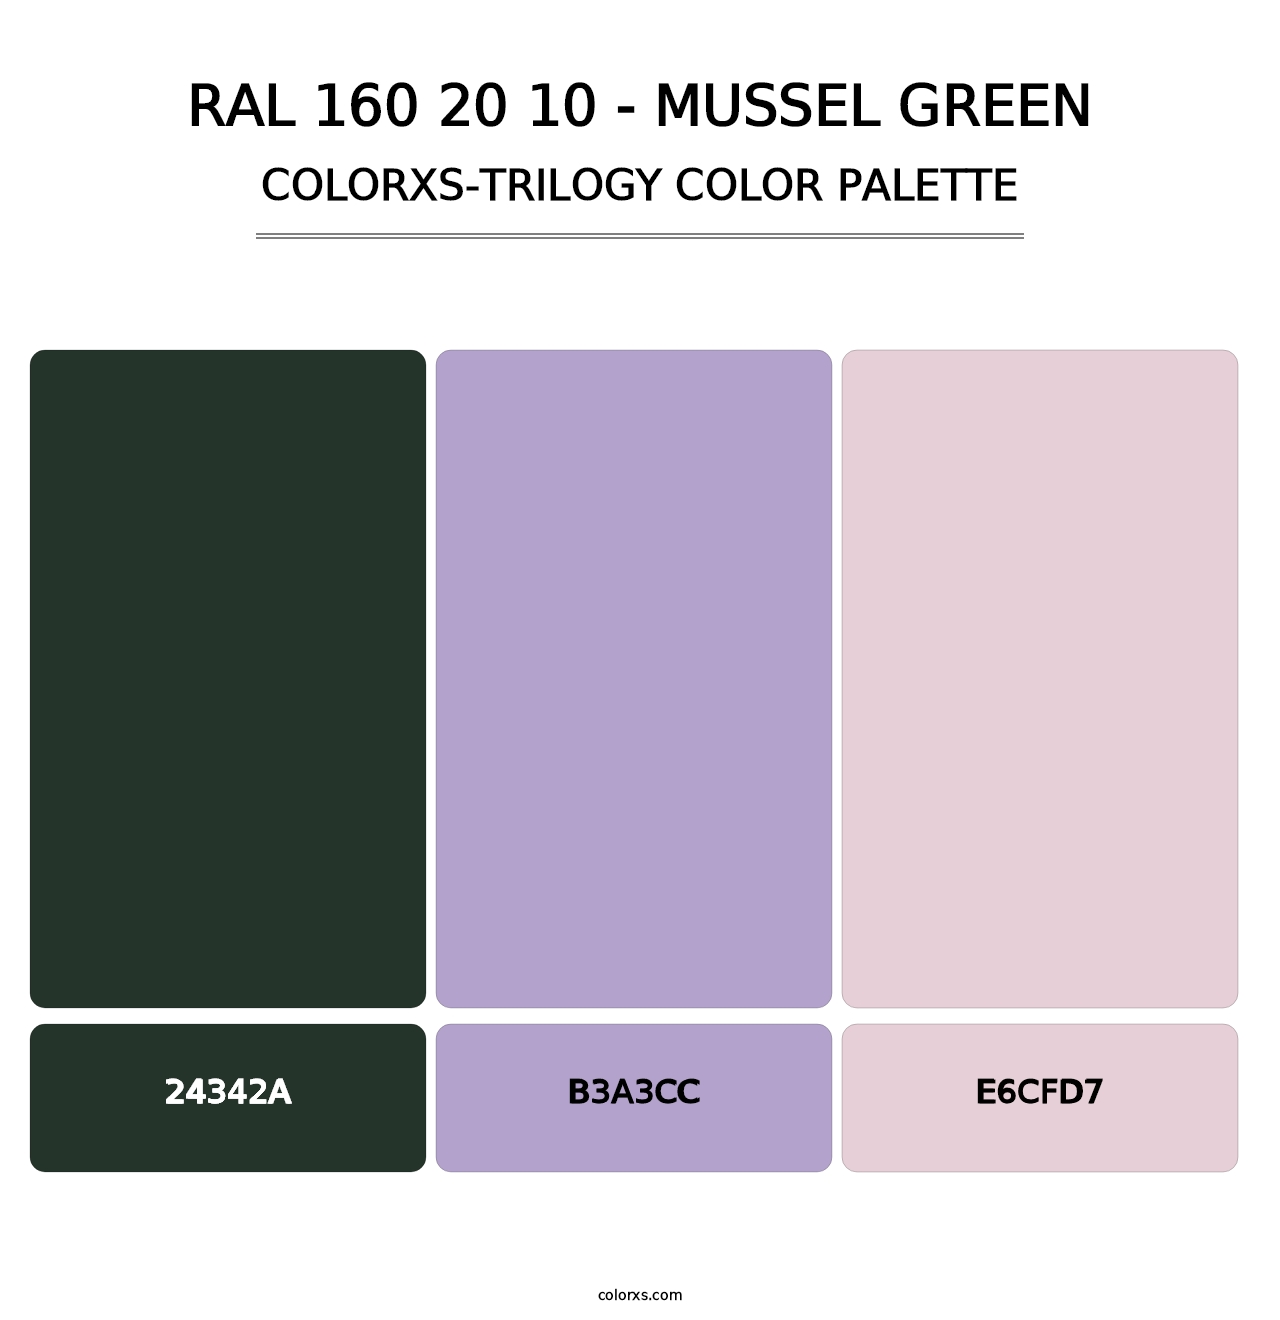 RAL 160 20 10 - Mussel Green - Colorxs Trilogy Palette